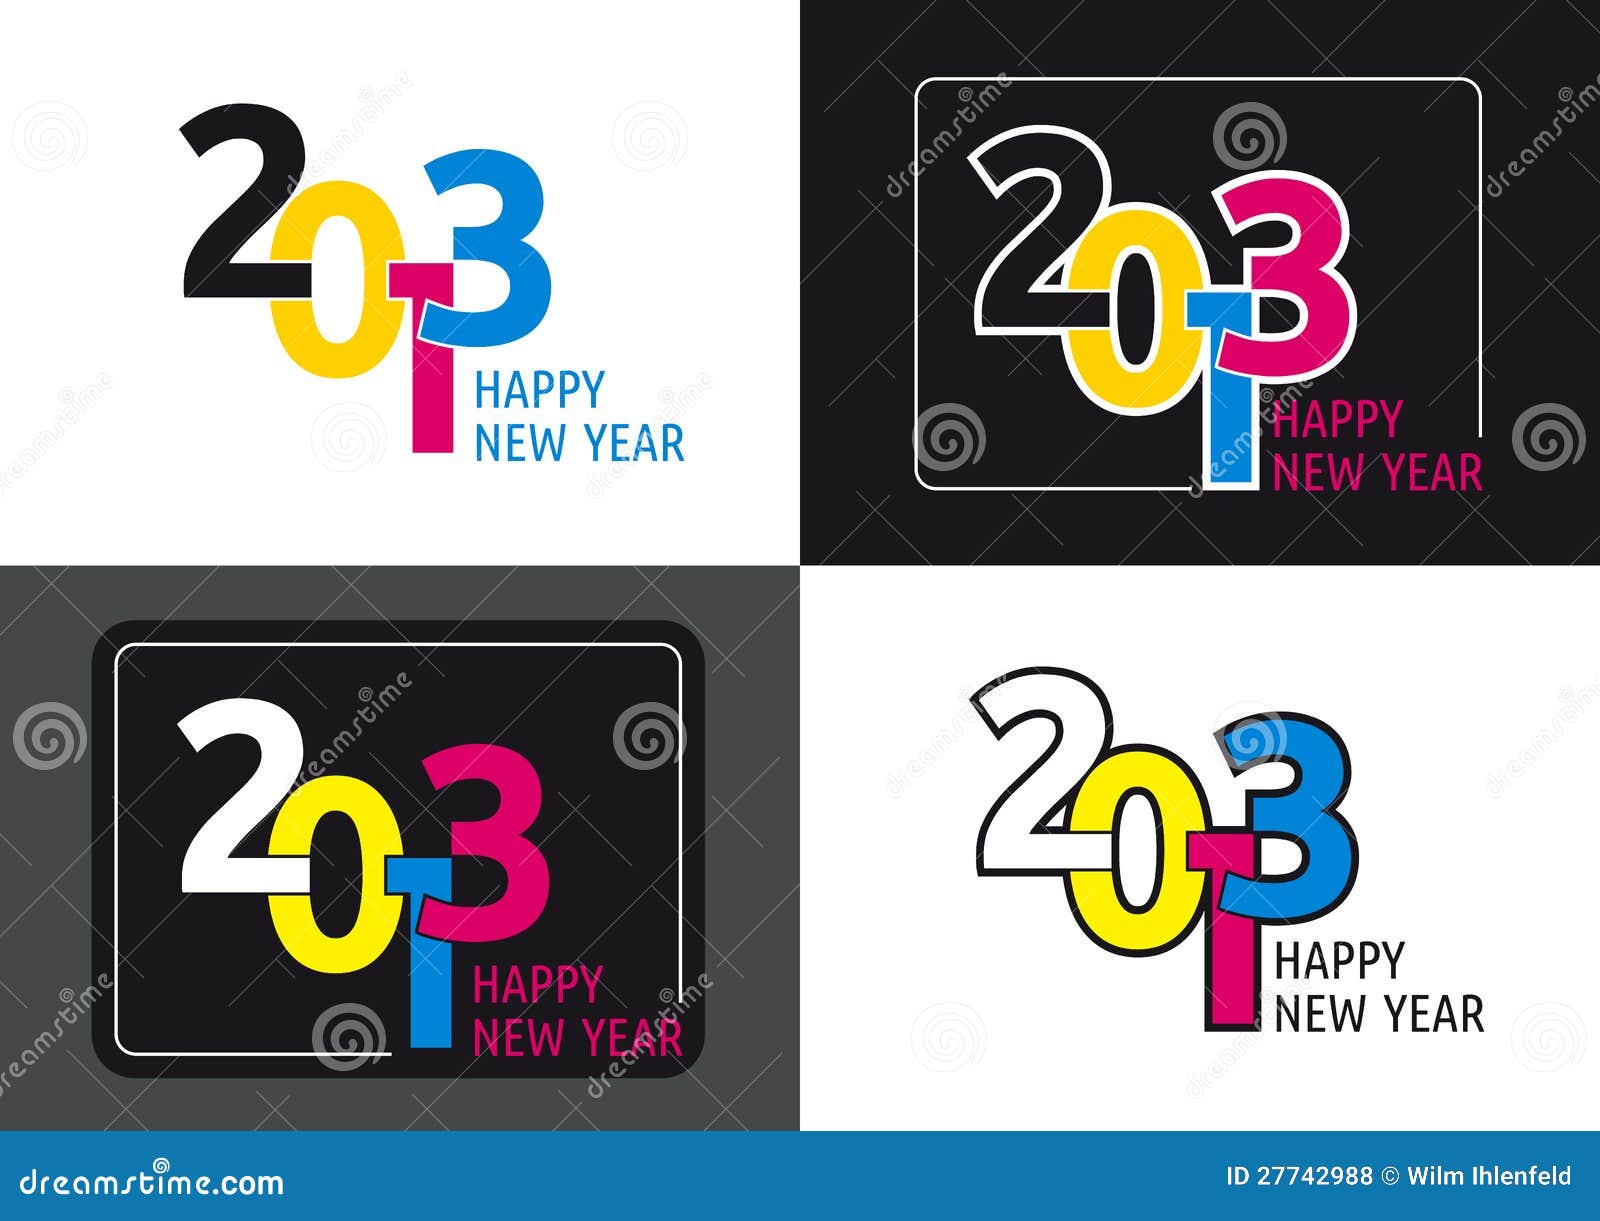 free clipart new years eve 2013 - photo #48